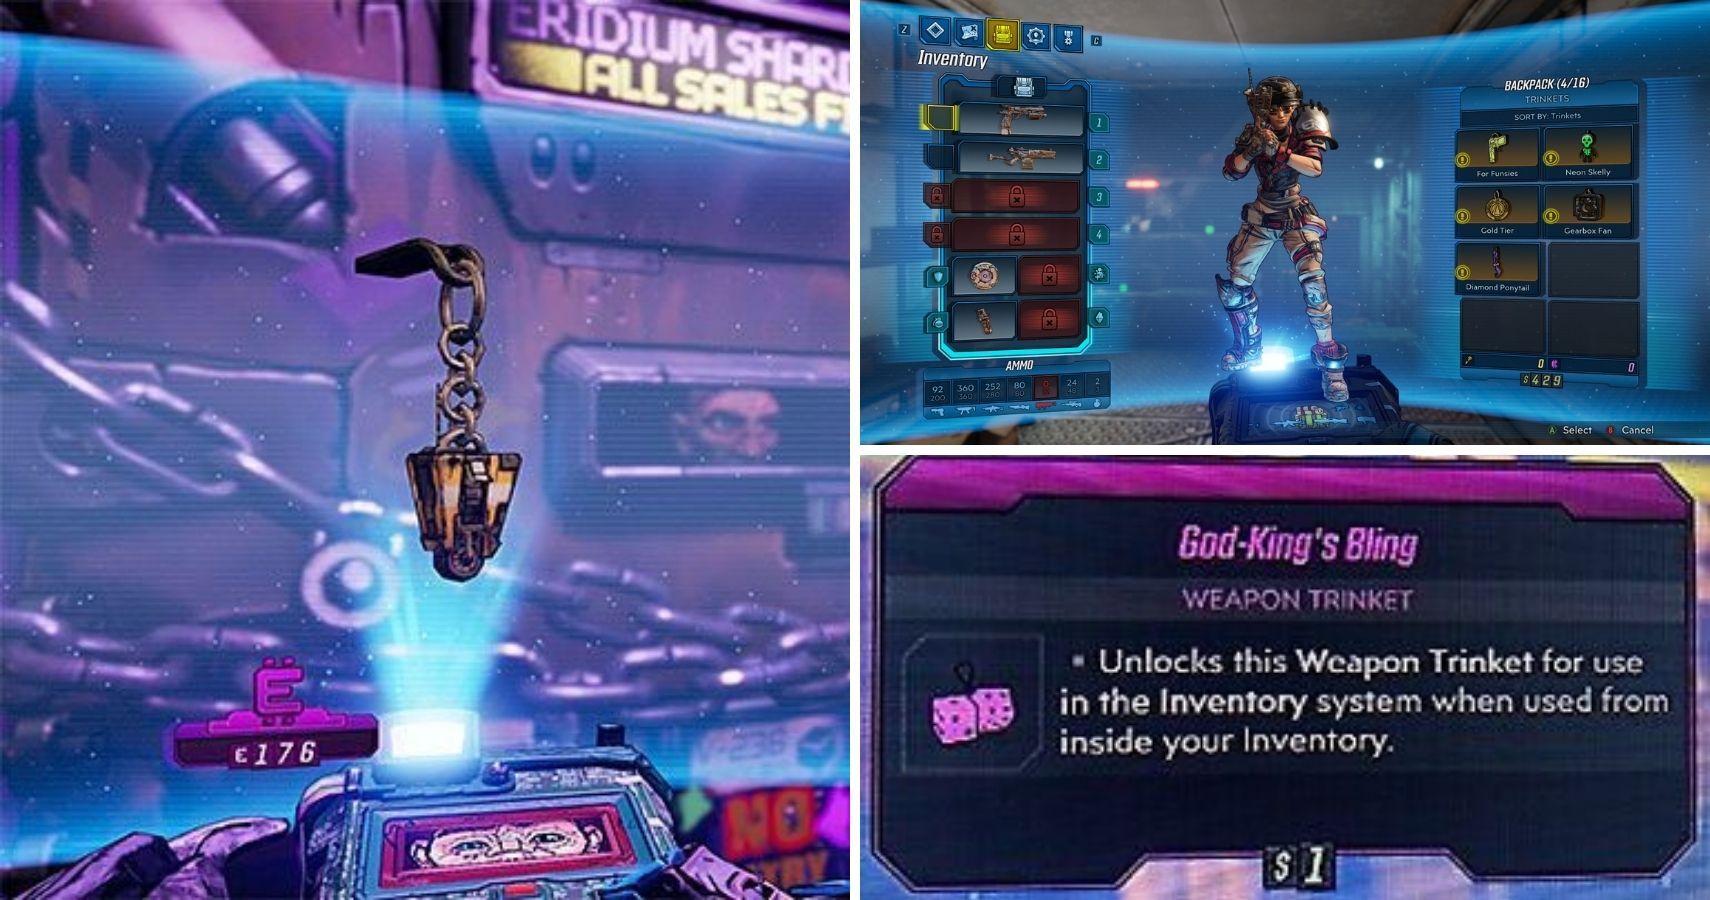 Where to find all weapon trinkets in Borderlands 3